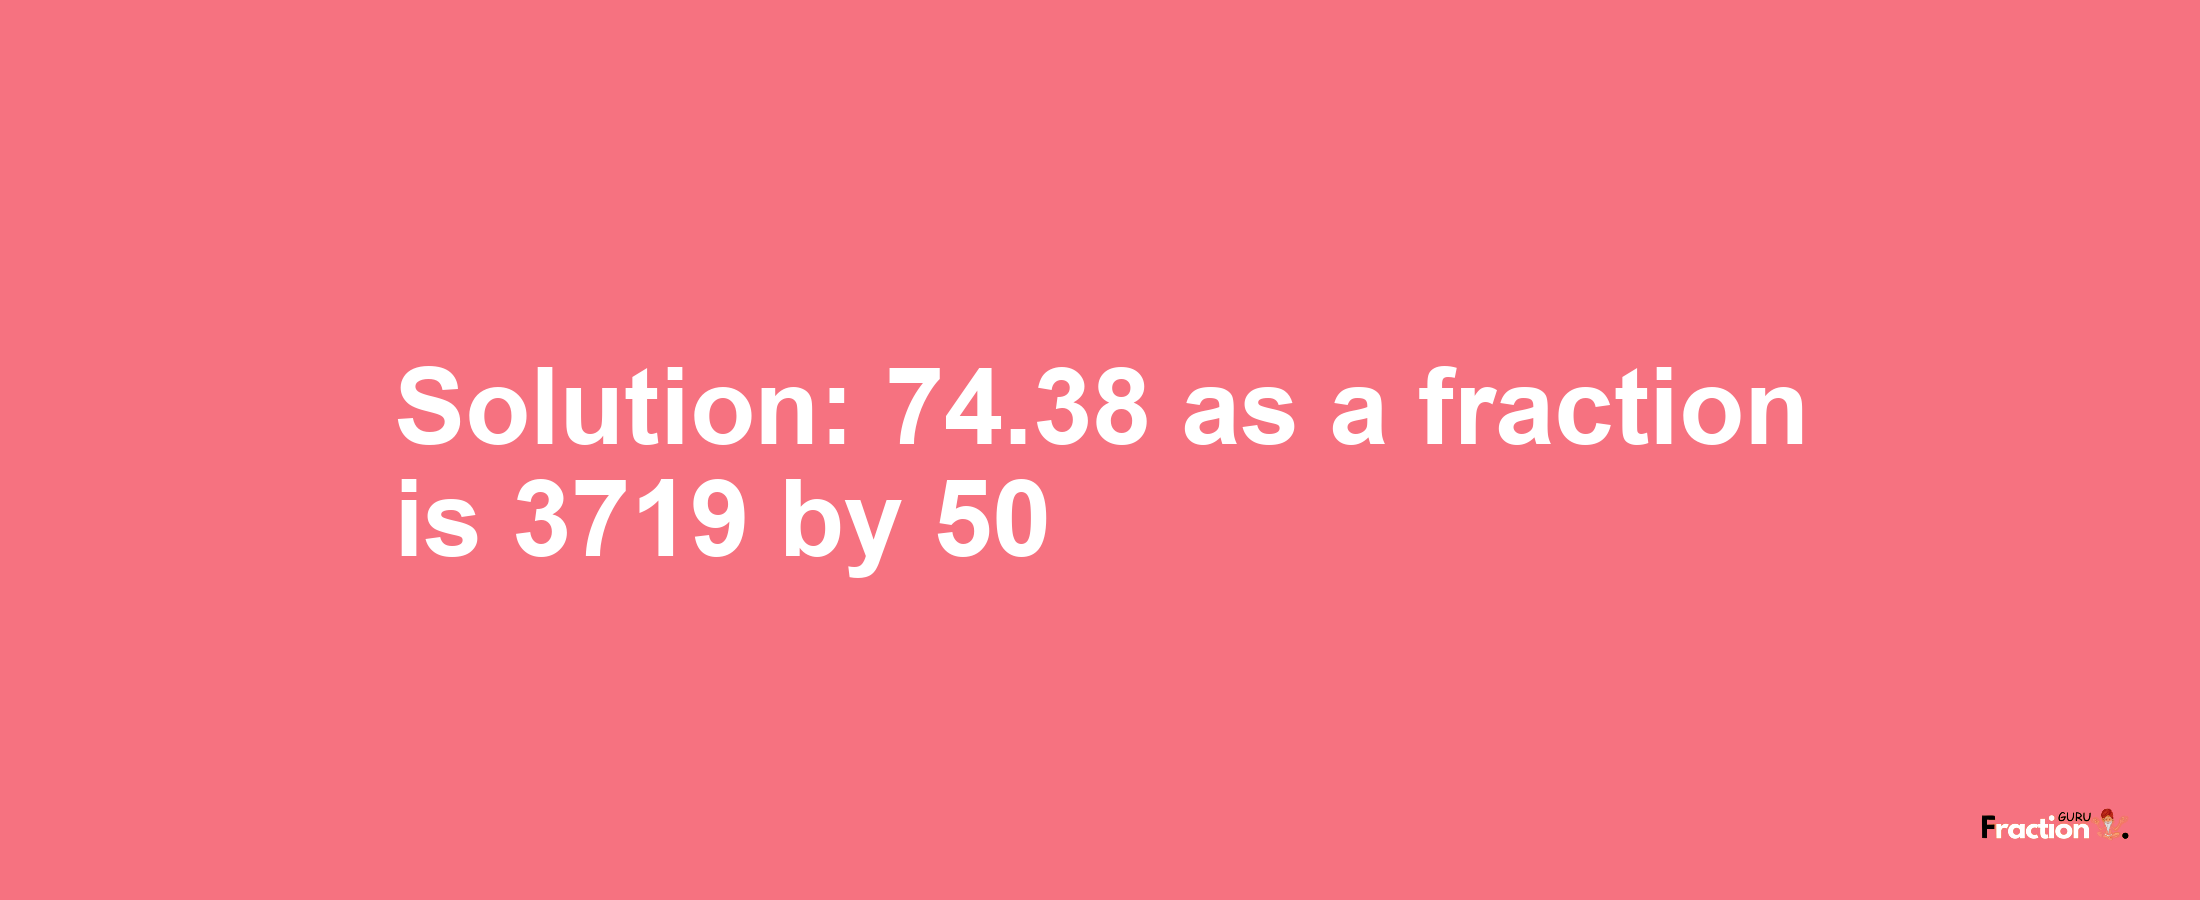 Solution:74.38 as a fraction is 3719/50